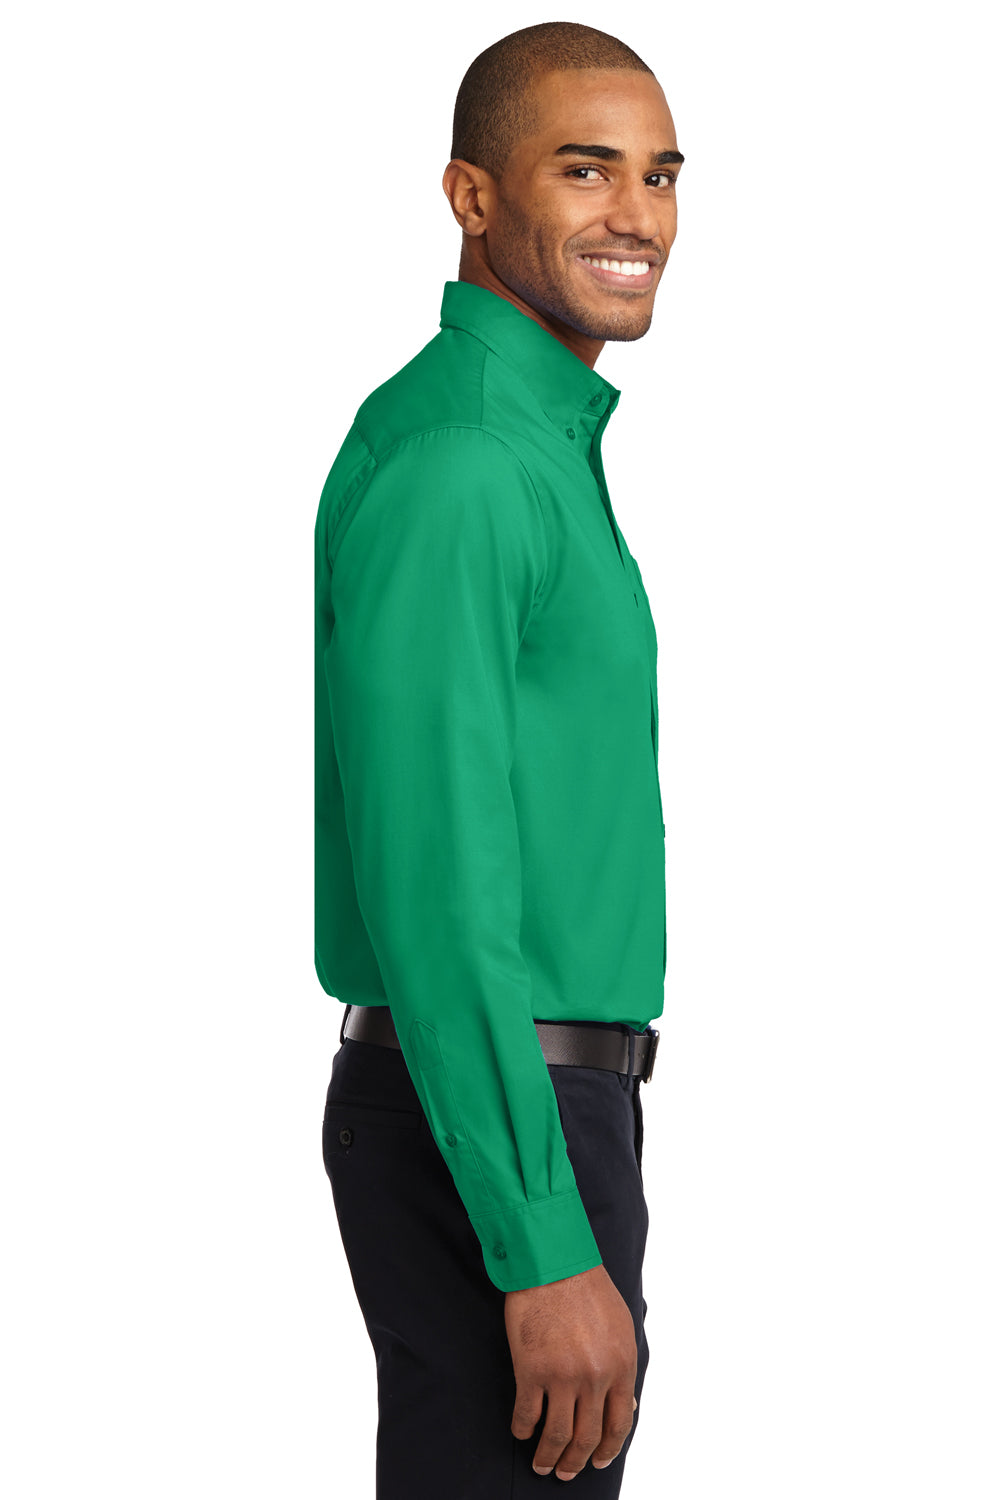 Port Authority S608/TLS608/S608ES Mens Easy Care Wrinkle Resistant Long Sleeve Button Down Shirt w/ Pocket Court Green Side